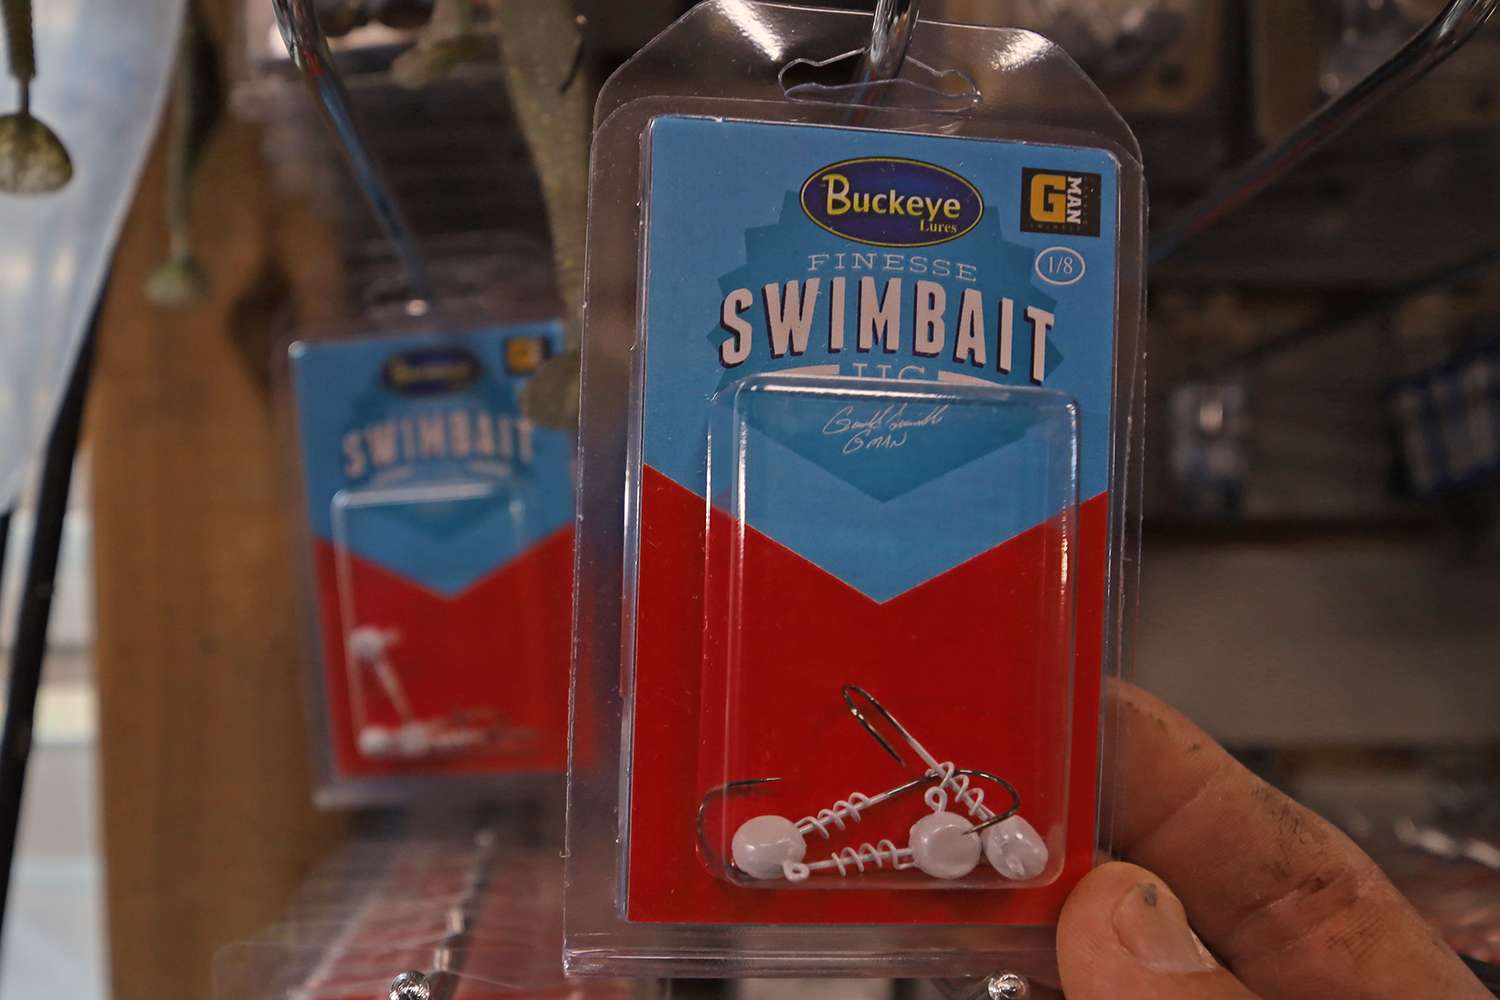 A swimbait is a great presentation to start out with because you can rig it weedless and slow-roll it along the bottom. Simple, easy to learn and the fish like it.